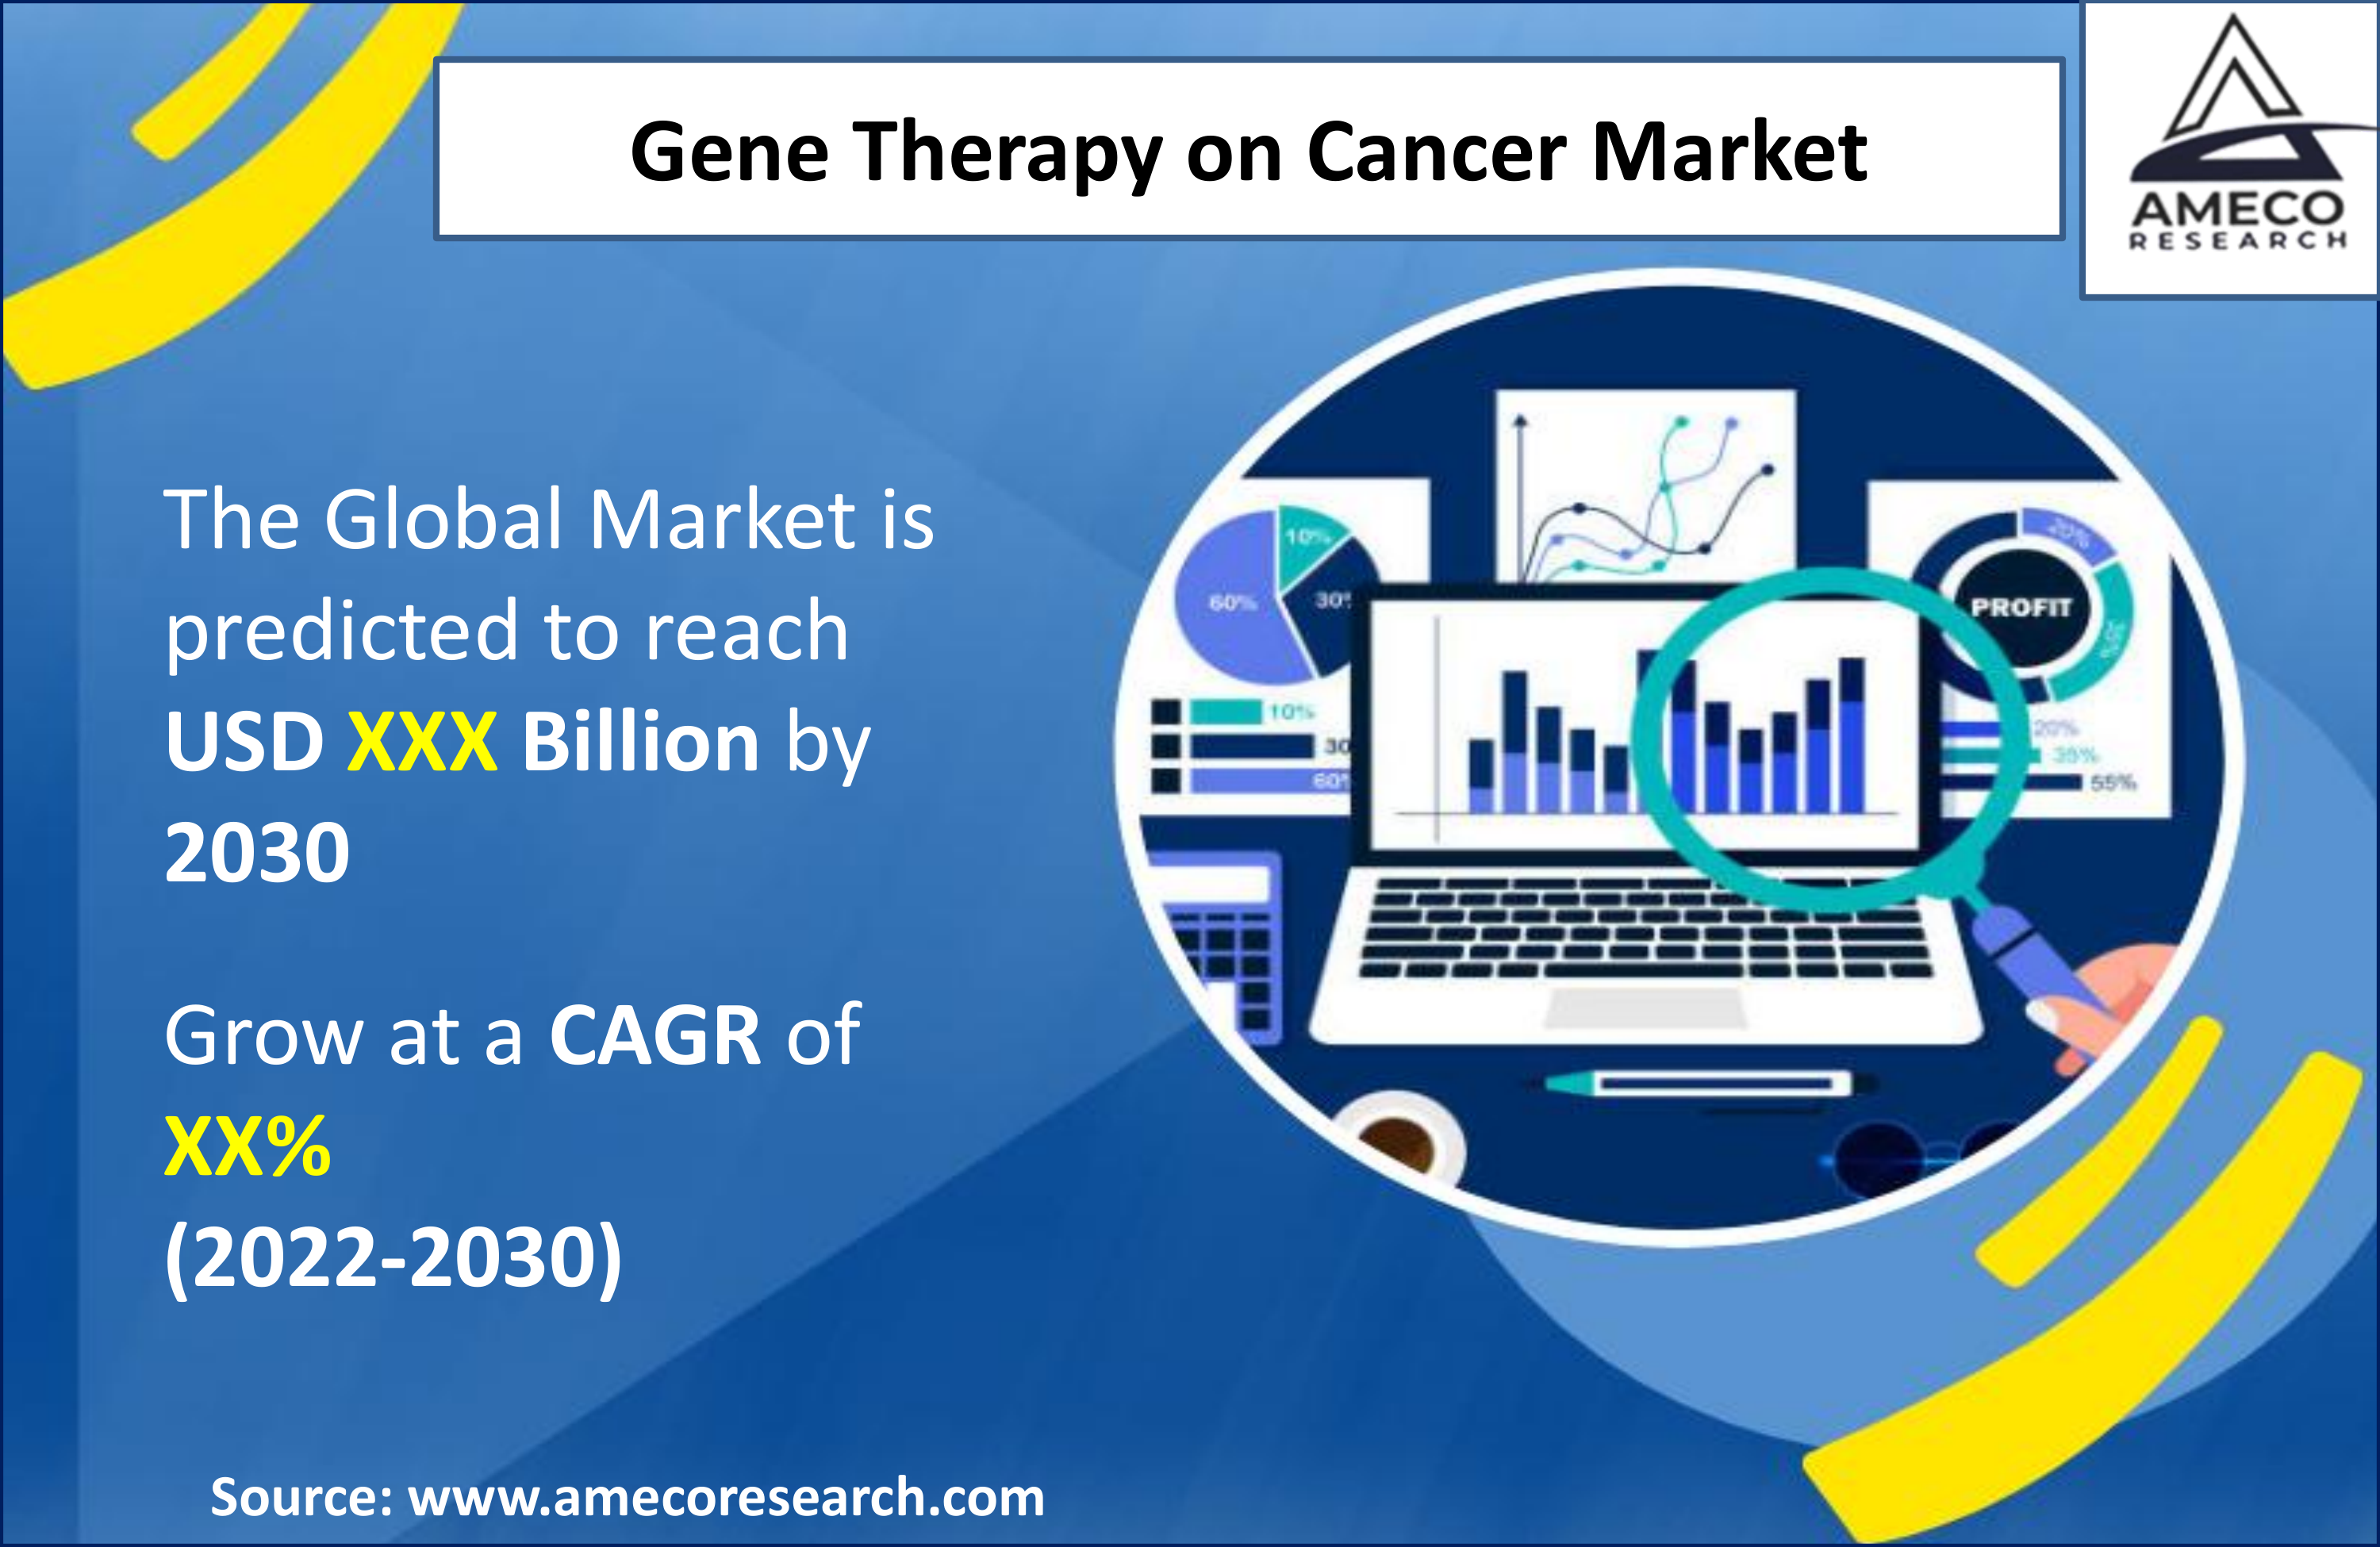 Gene Therapy on Cancer Market